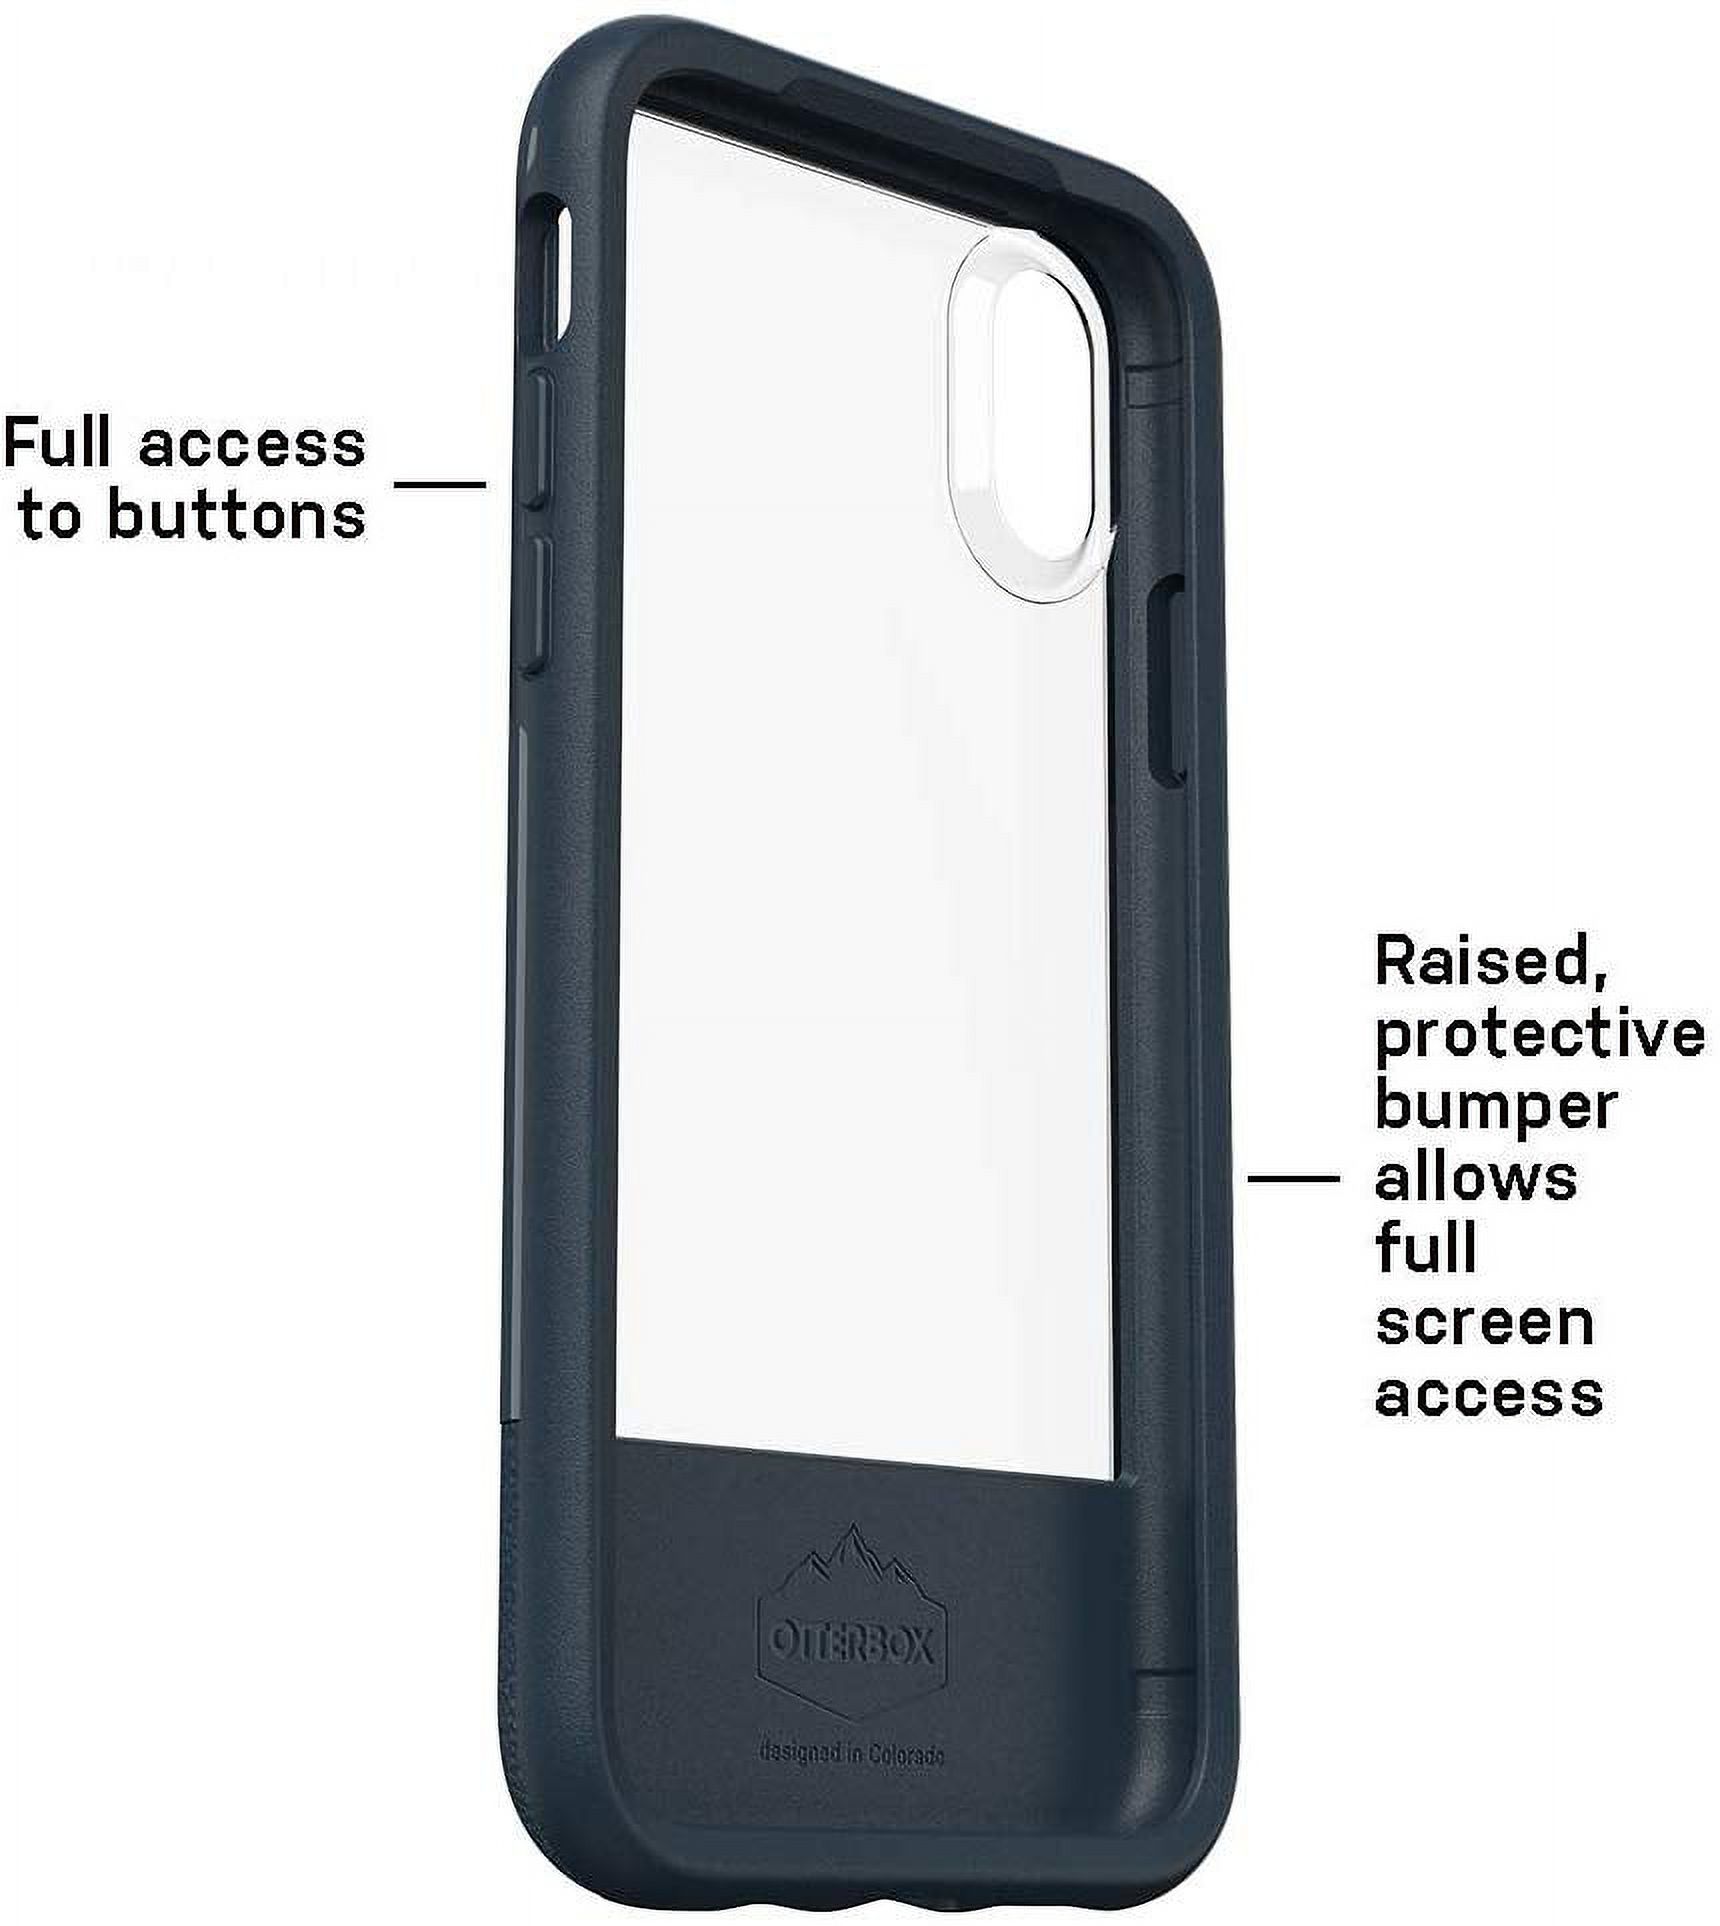 OtterBox Clear Case for iPhone Xs and iPhone X, Lucent Black - image 2 of 4